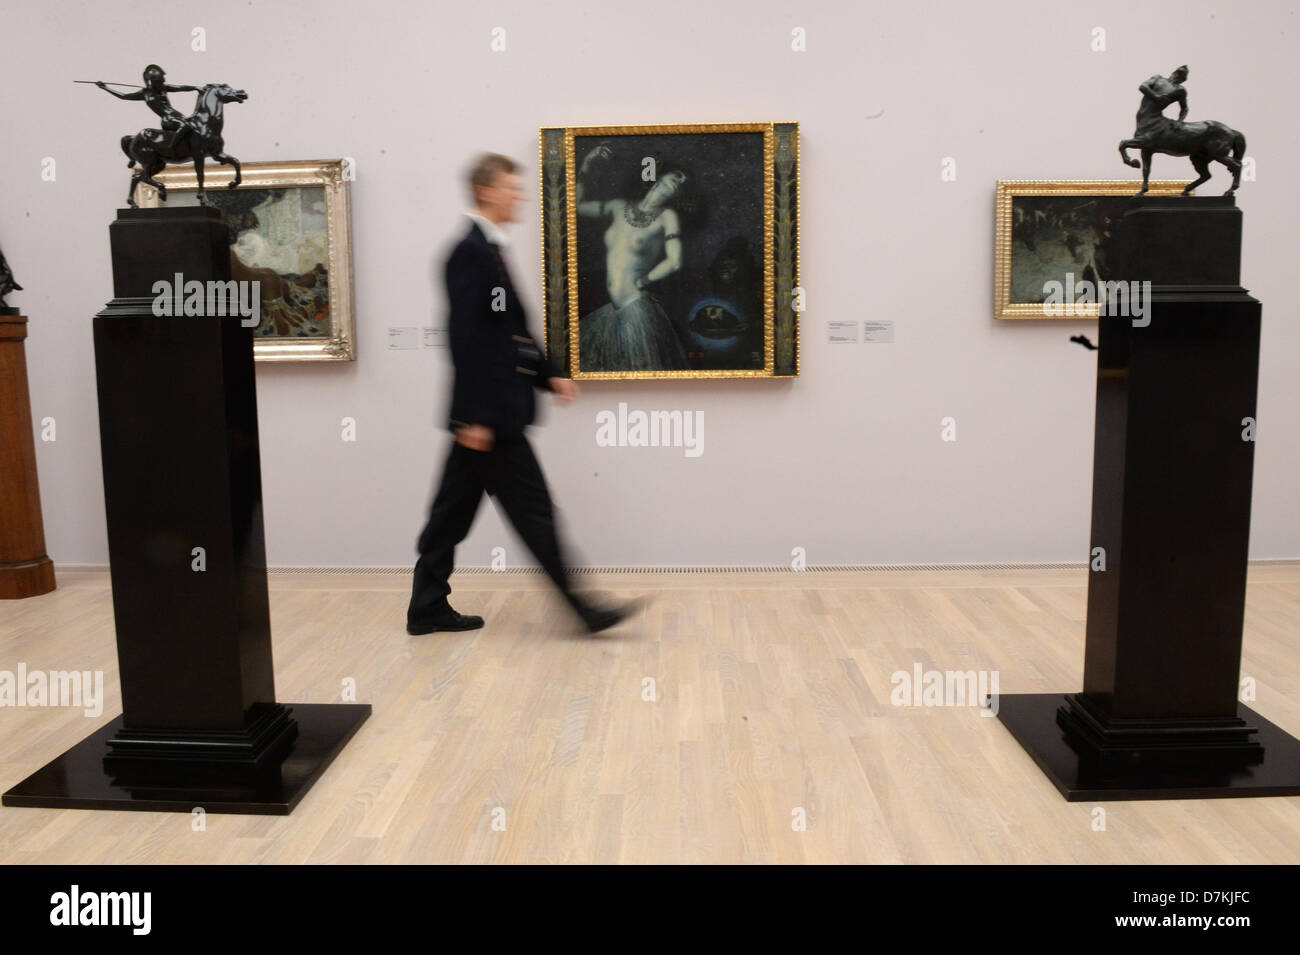 The painting 'Salome' by Franz von Stuck is on display in the newly opened Lenbachhaus in Munich, Germany, 06 May 2013. The Lenbachhaus opens to the public on 08 May after renovation works have been completed. Photo: FELIX HOERHAGER Stock Photo